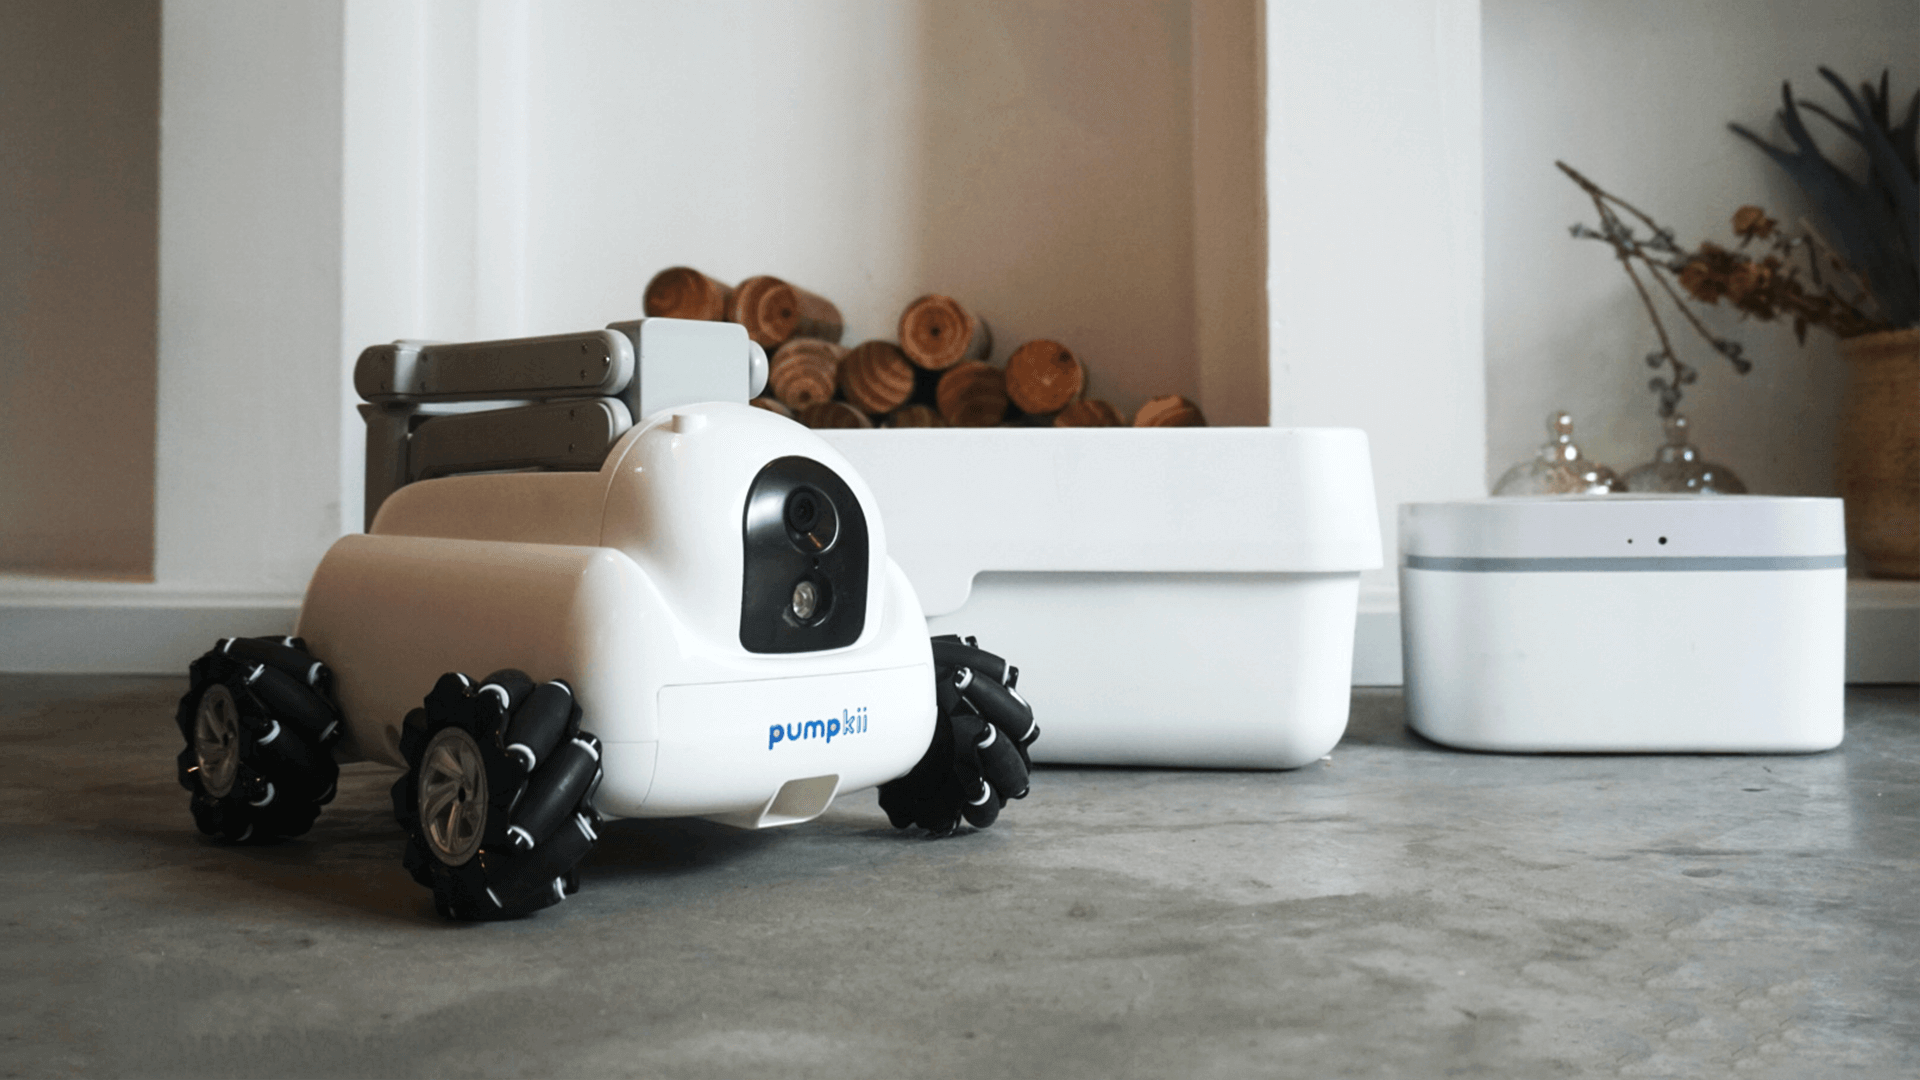 Pumpkii modular robot for pets surfaces on Indiegogo at attractive starting price of $149